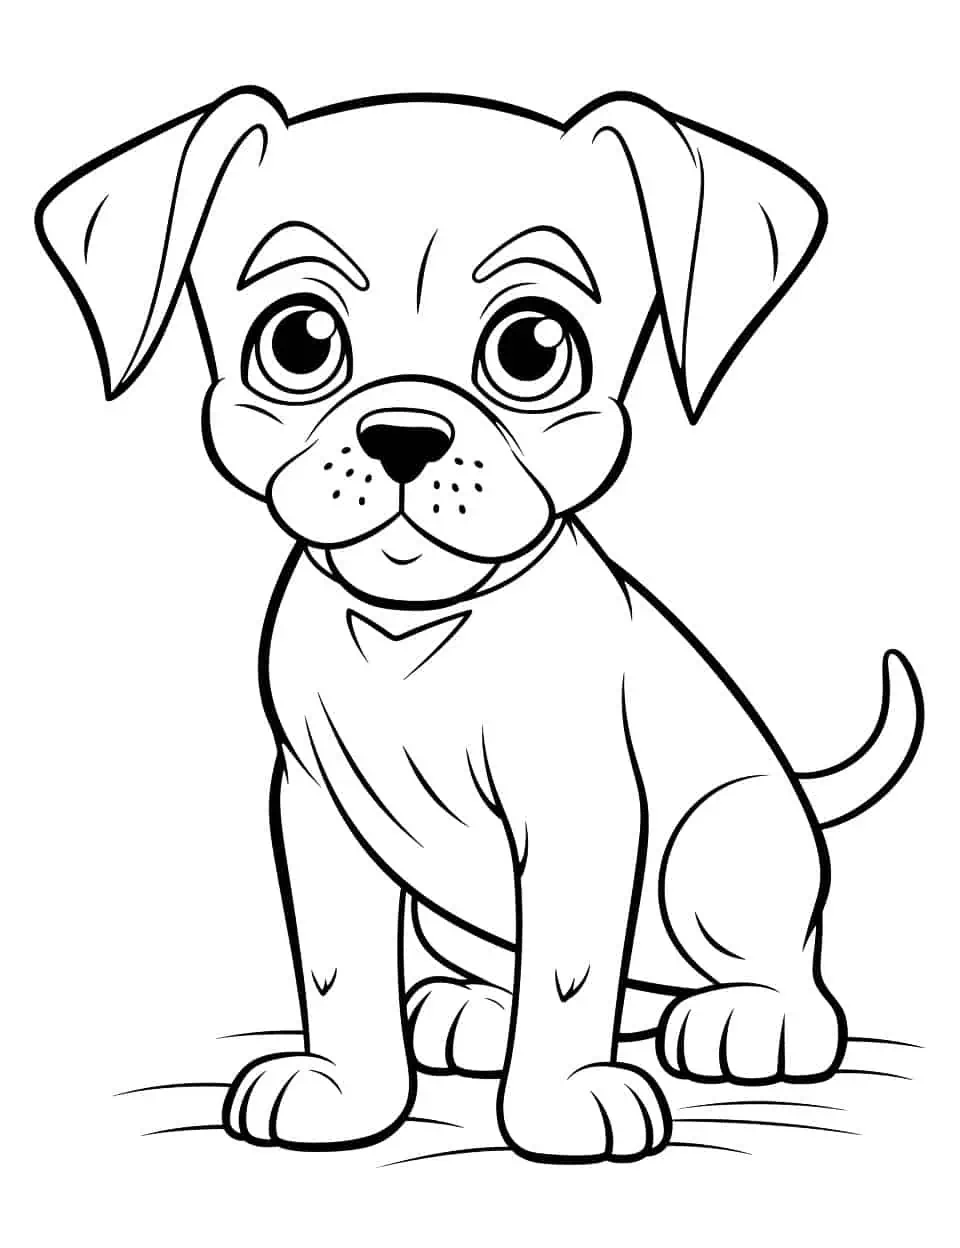 Kawaii Boxer Dog Coloring Page - A Boxer dog in a cute, kawaii style with big, adorable eyes.